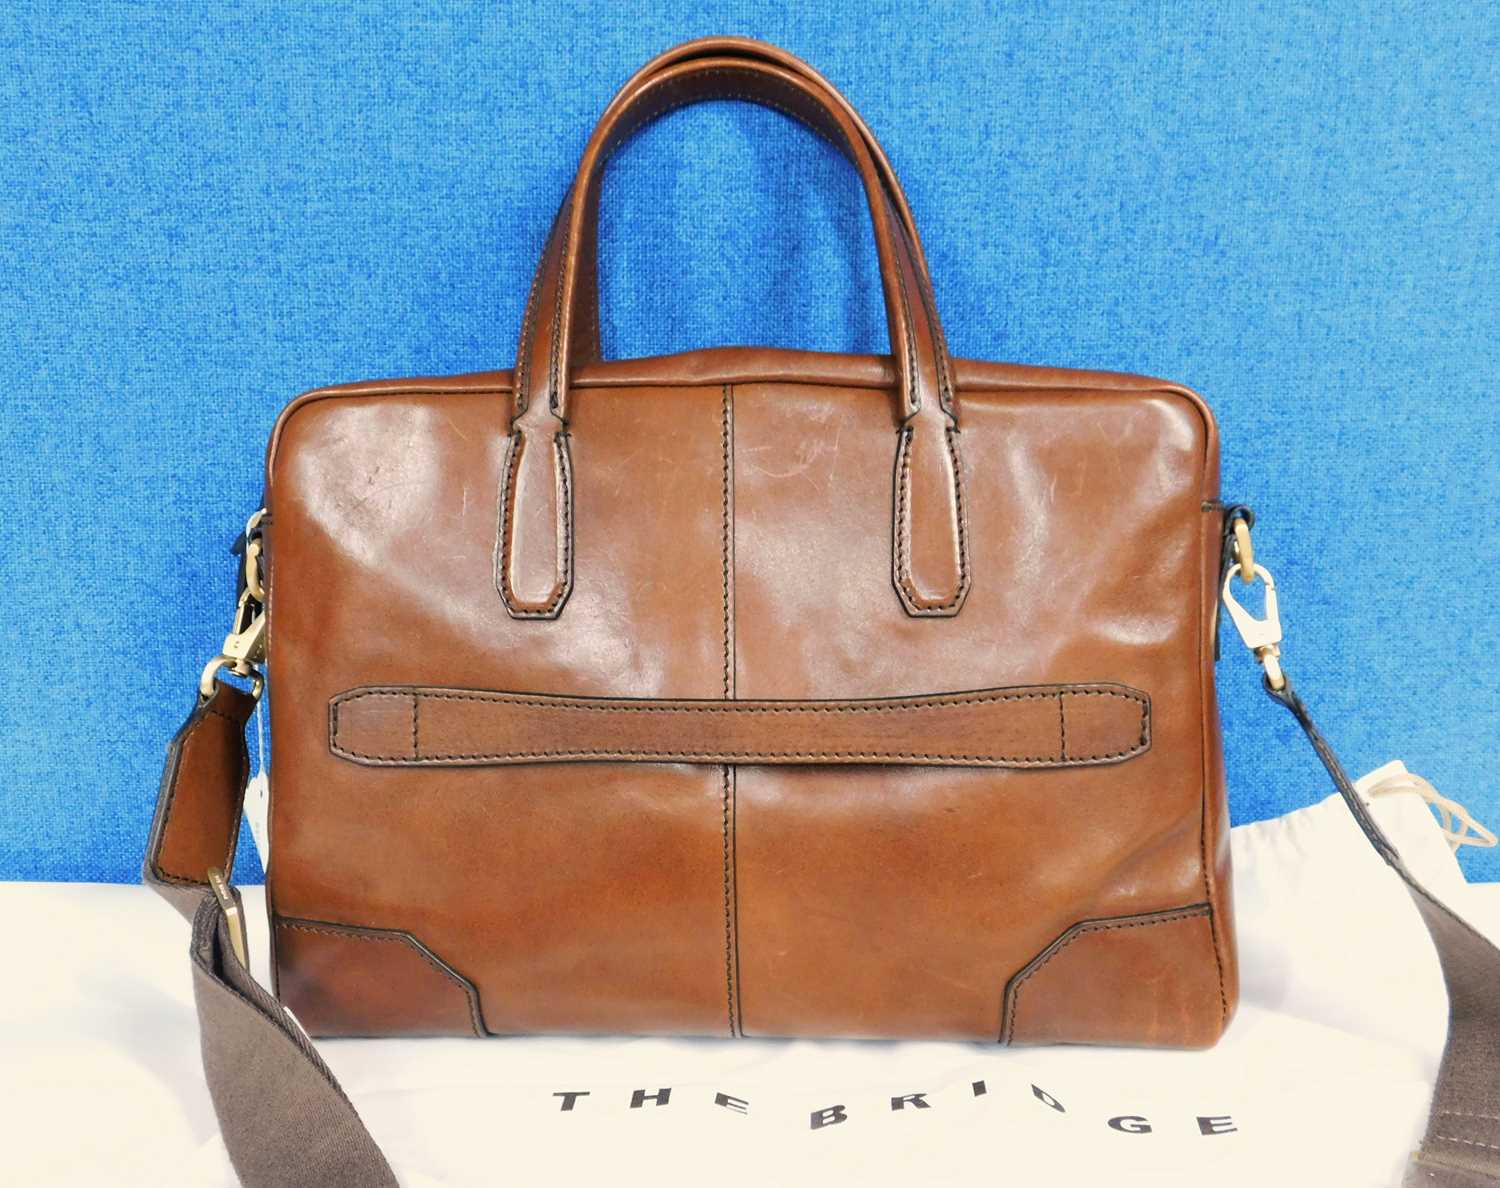 A tan leather tote bag by The Bridge, with top zip fastening with hand straps and detachable - Image 2 of 6